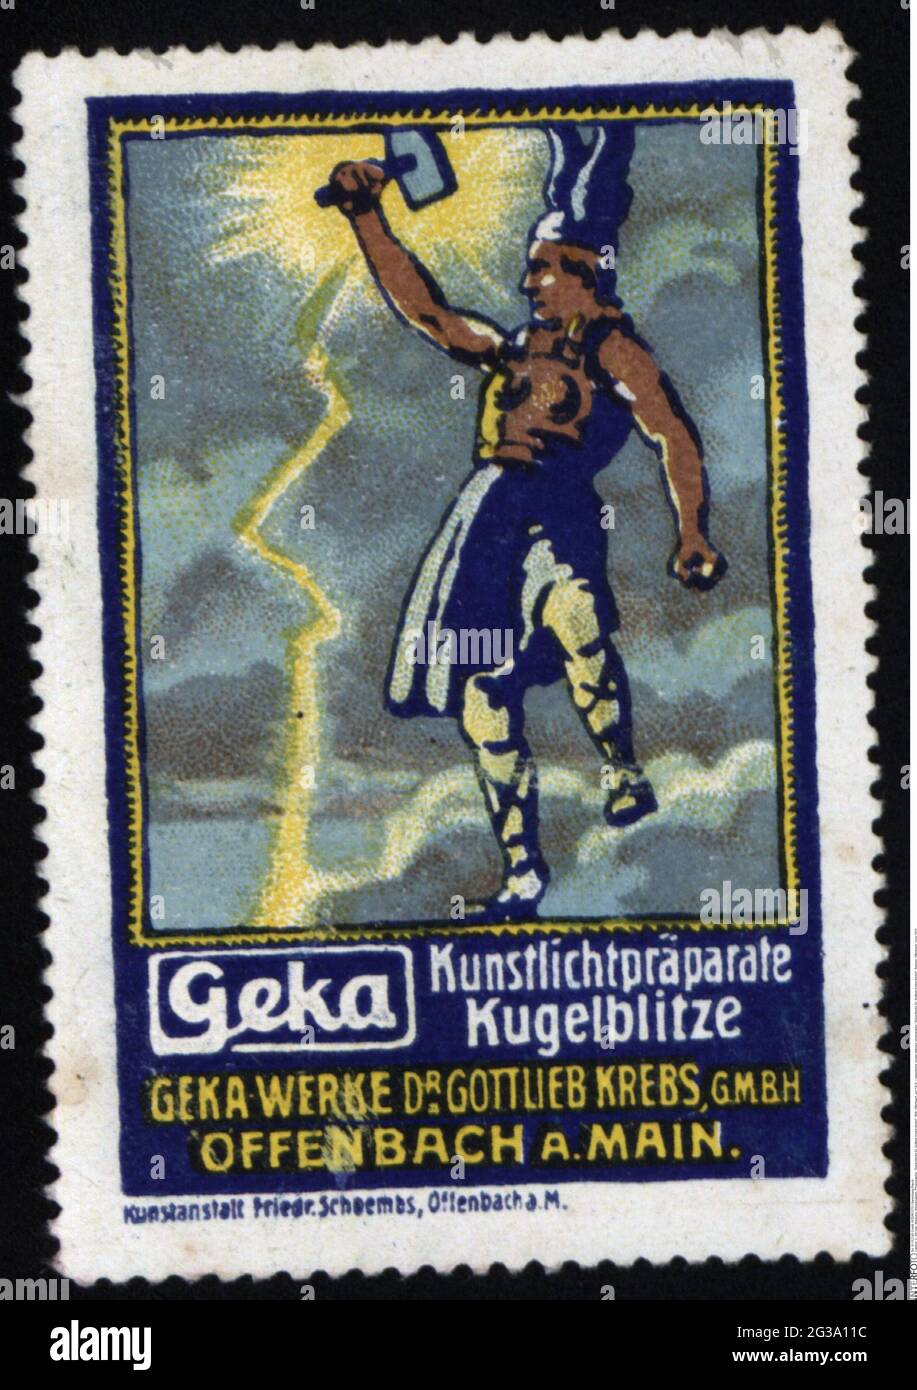 advertising, poster stamps, photography, 'Geka-Werke Dr. Gottlieb Krebs GmbH', flashes, Offenbach, ADDITIONAL-RIGHTS-CLEARANCE-INFO-NOT-AVAILABLE Stock Photo